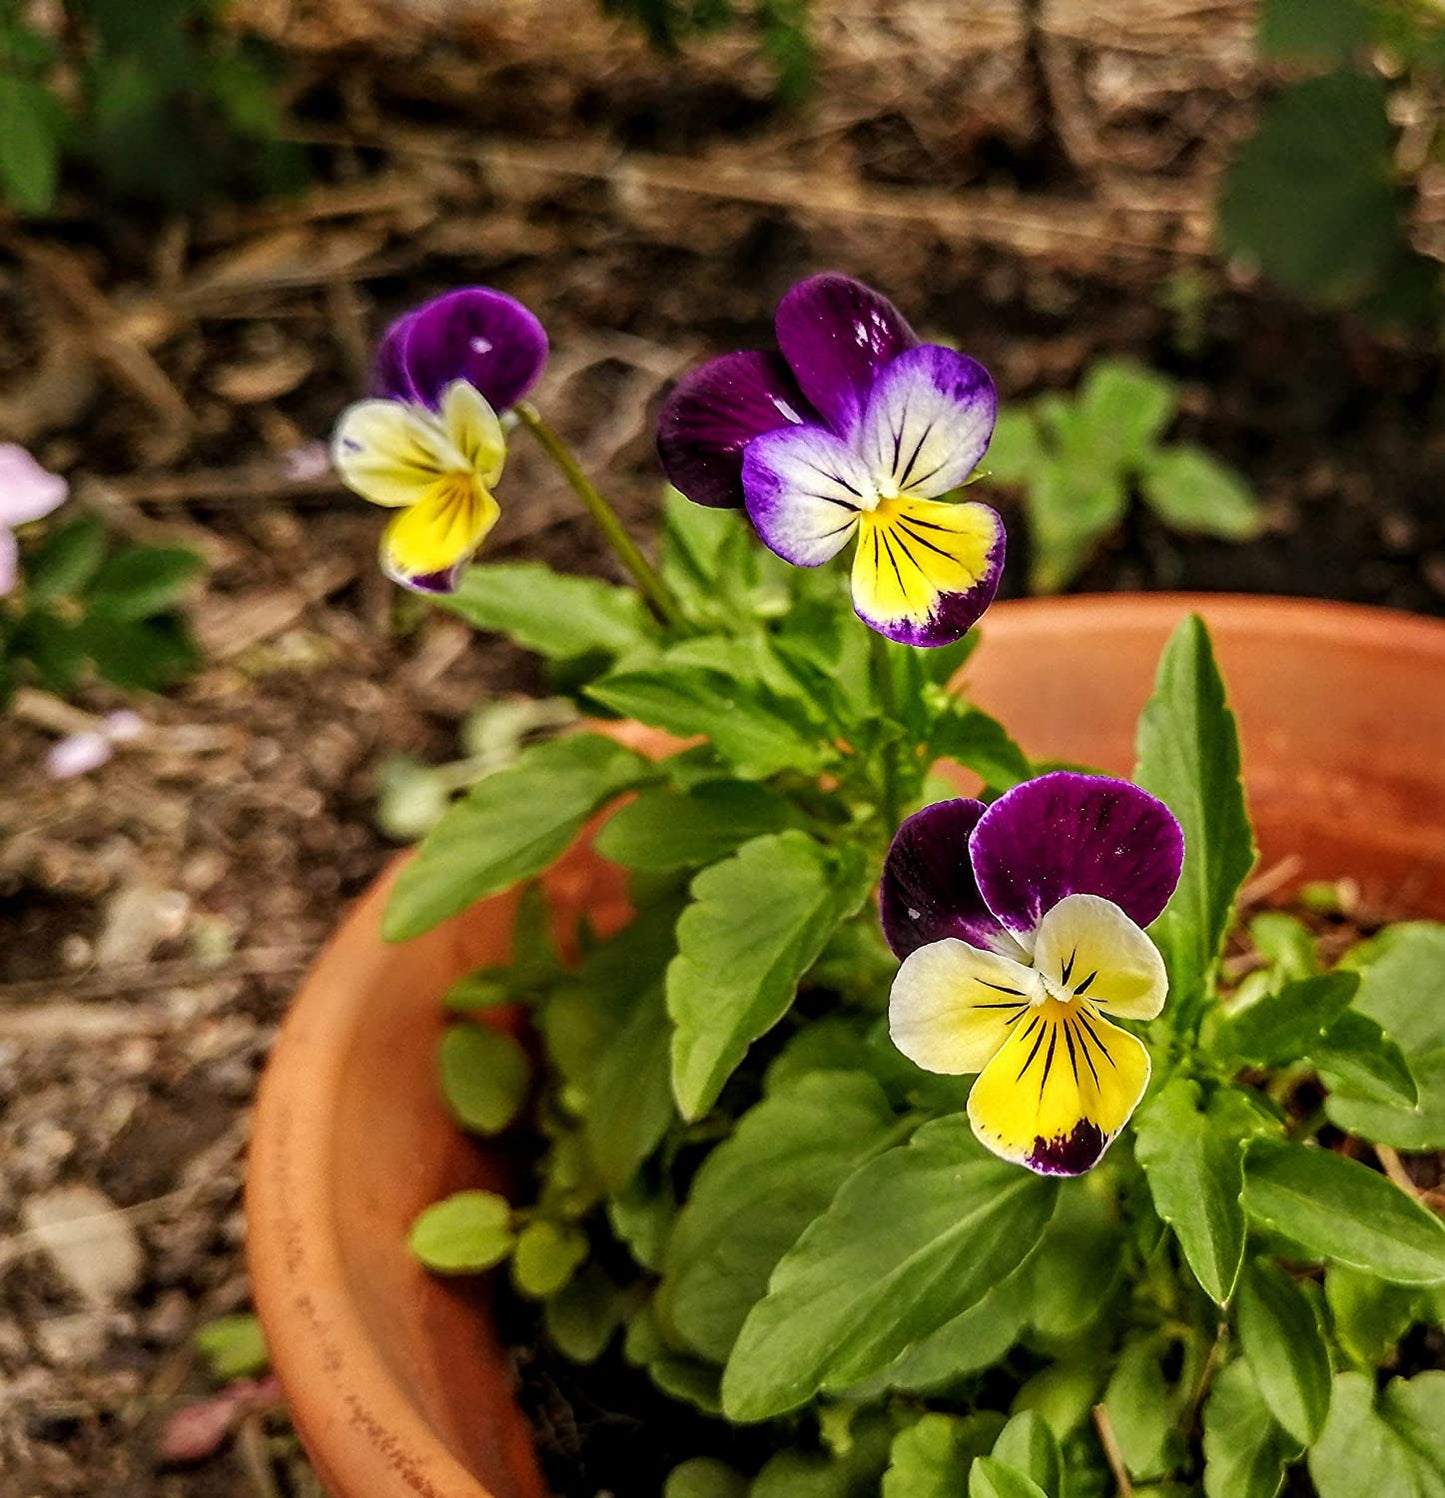 Johnny-Jump-Up 100 Seeds - Viola Tricolor Non-GMO Heartsease Pansy, Wild Pansy, Edible Flowers